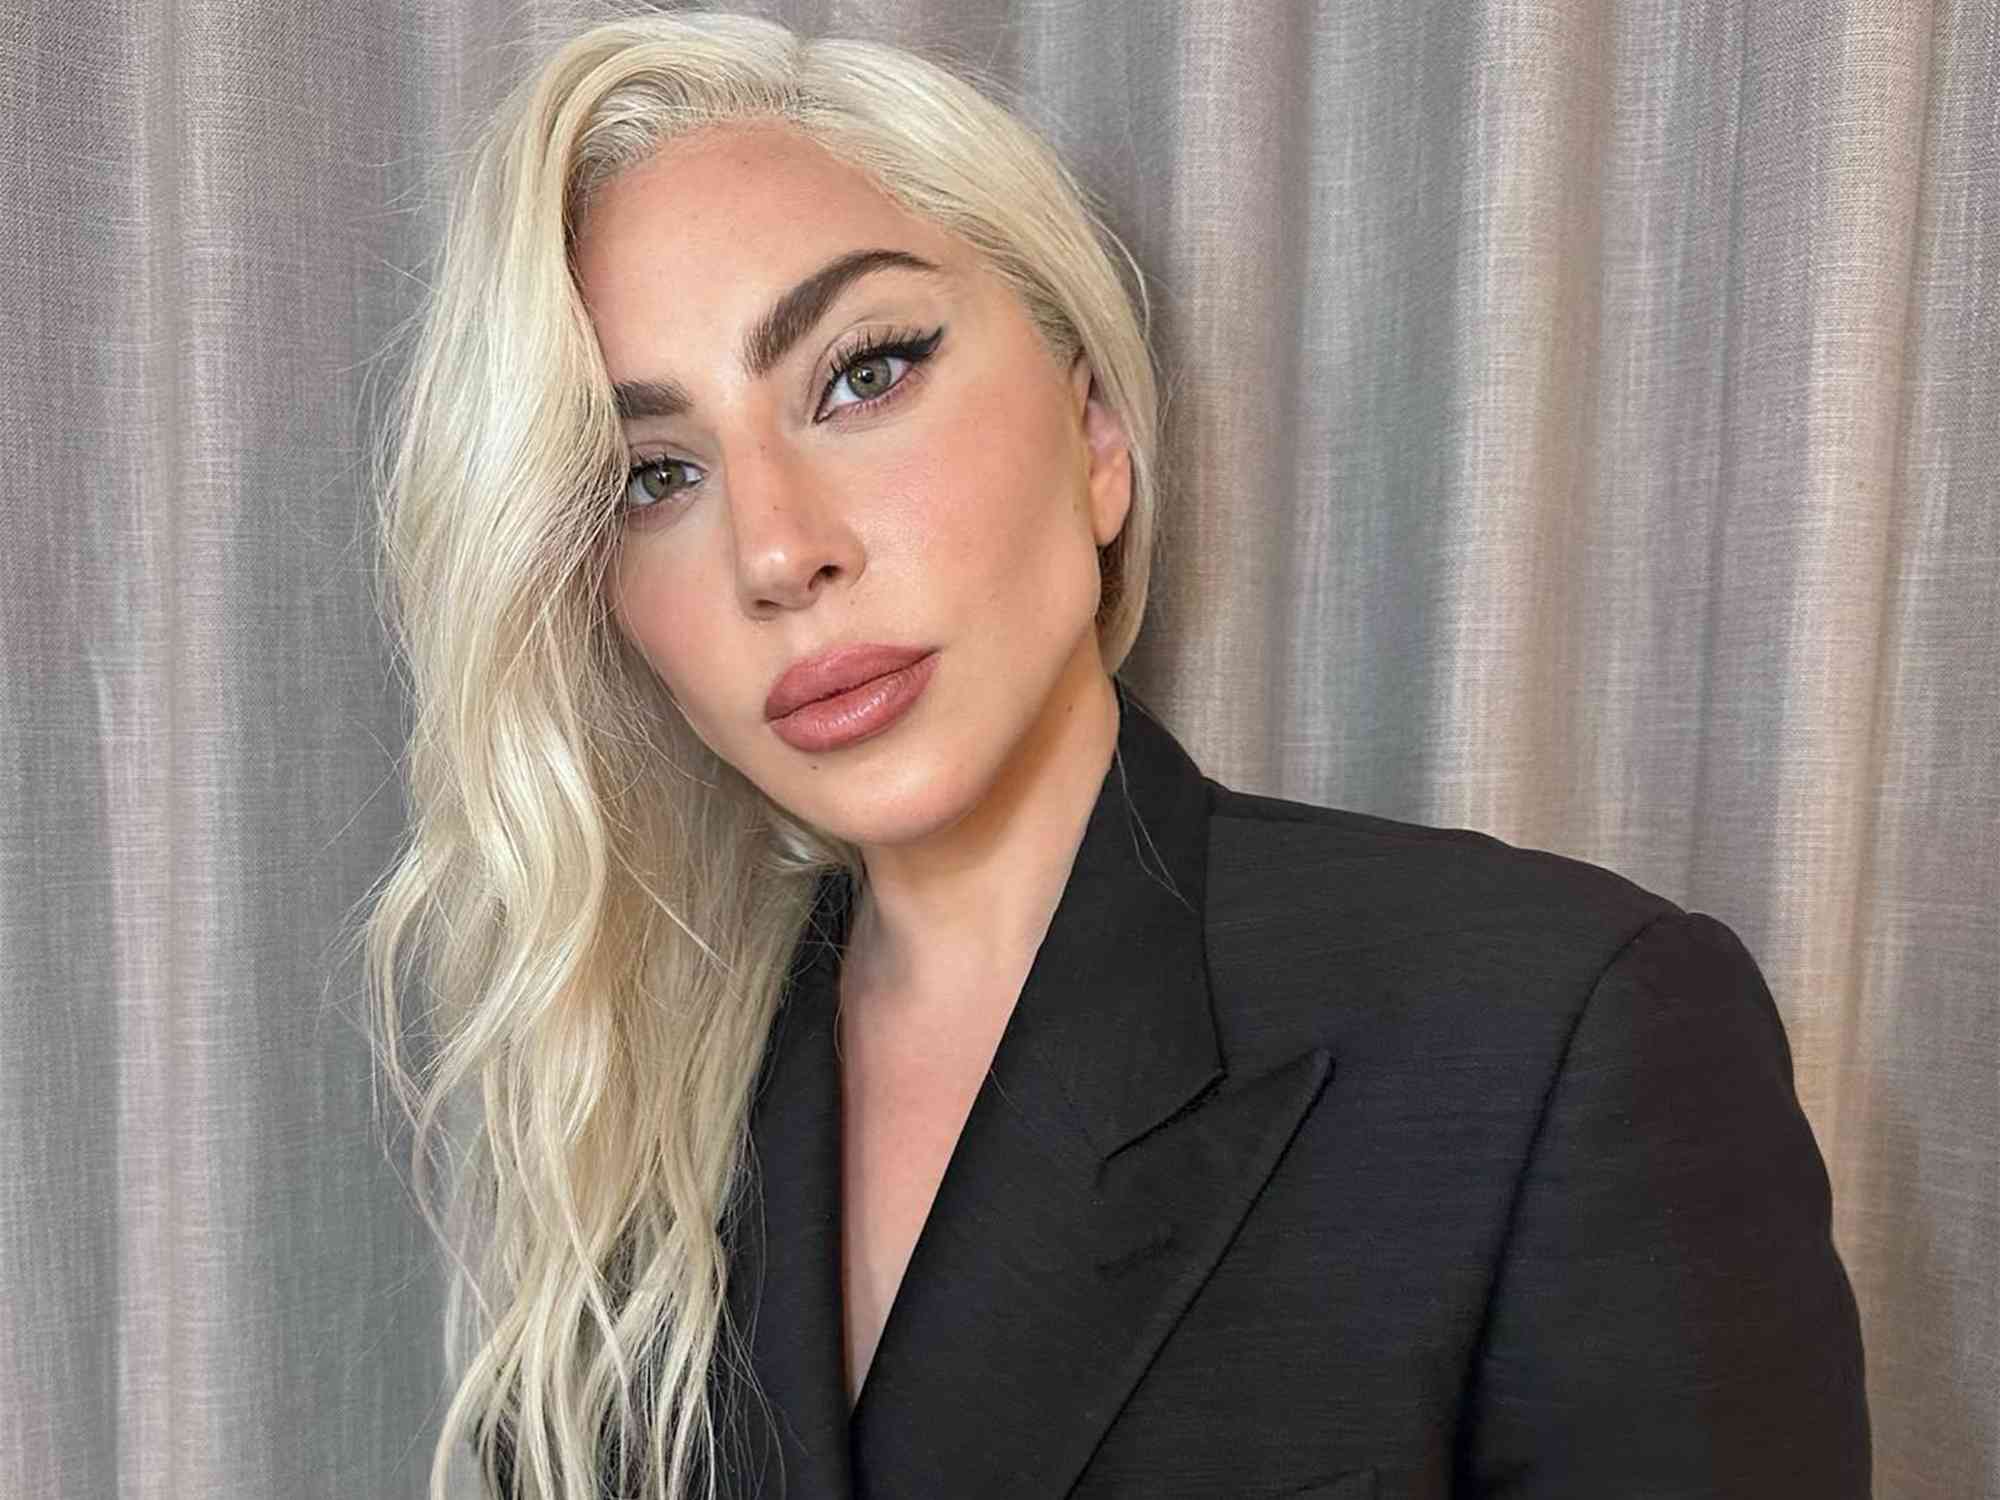 Lady Gaga's Jet-Black Micro Bangs Are Her Biggest Beauty Transformation In Years